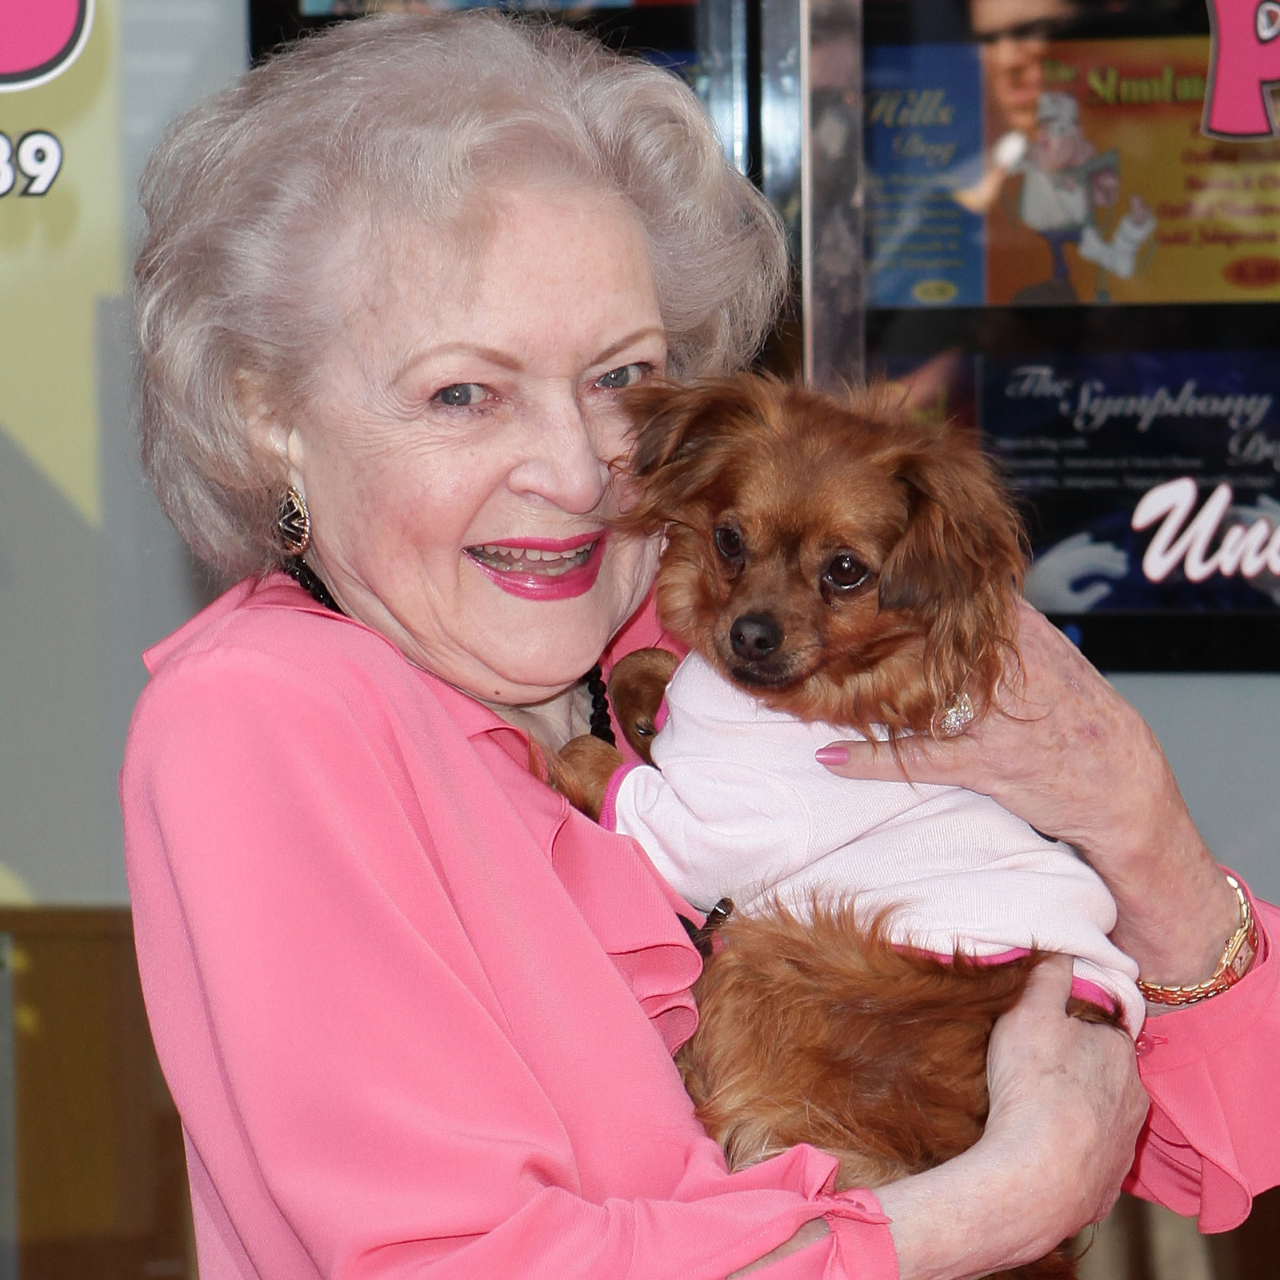 Betty White at the unveiling of "nude" Hot Dog in Pink's Hot Dog